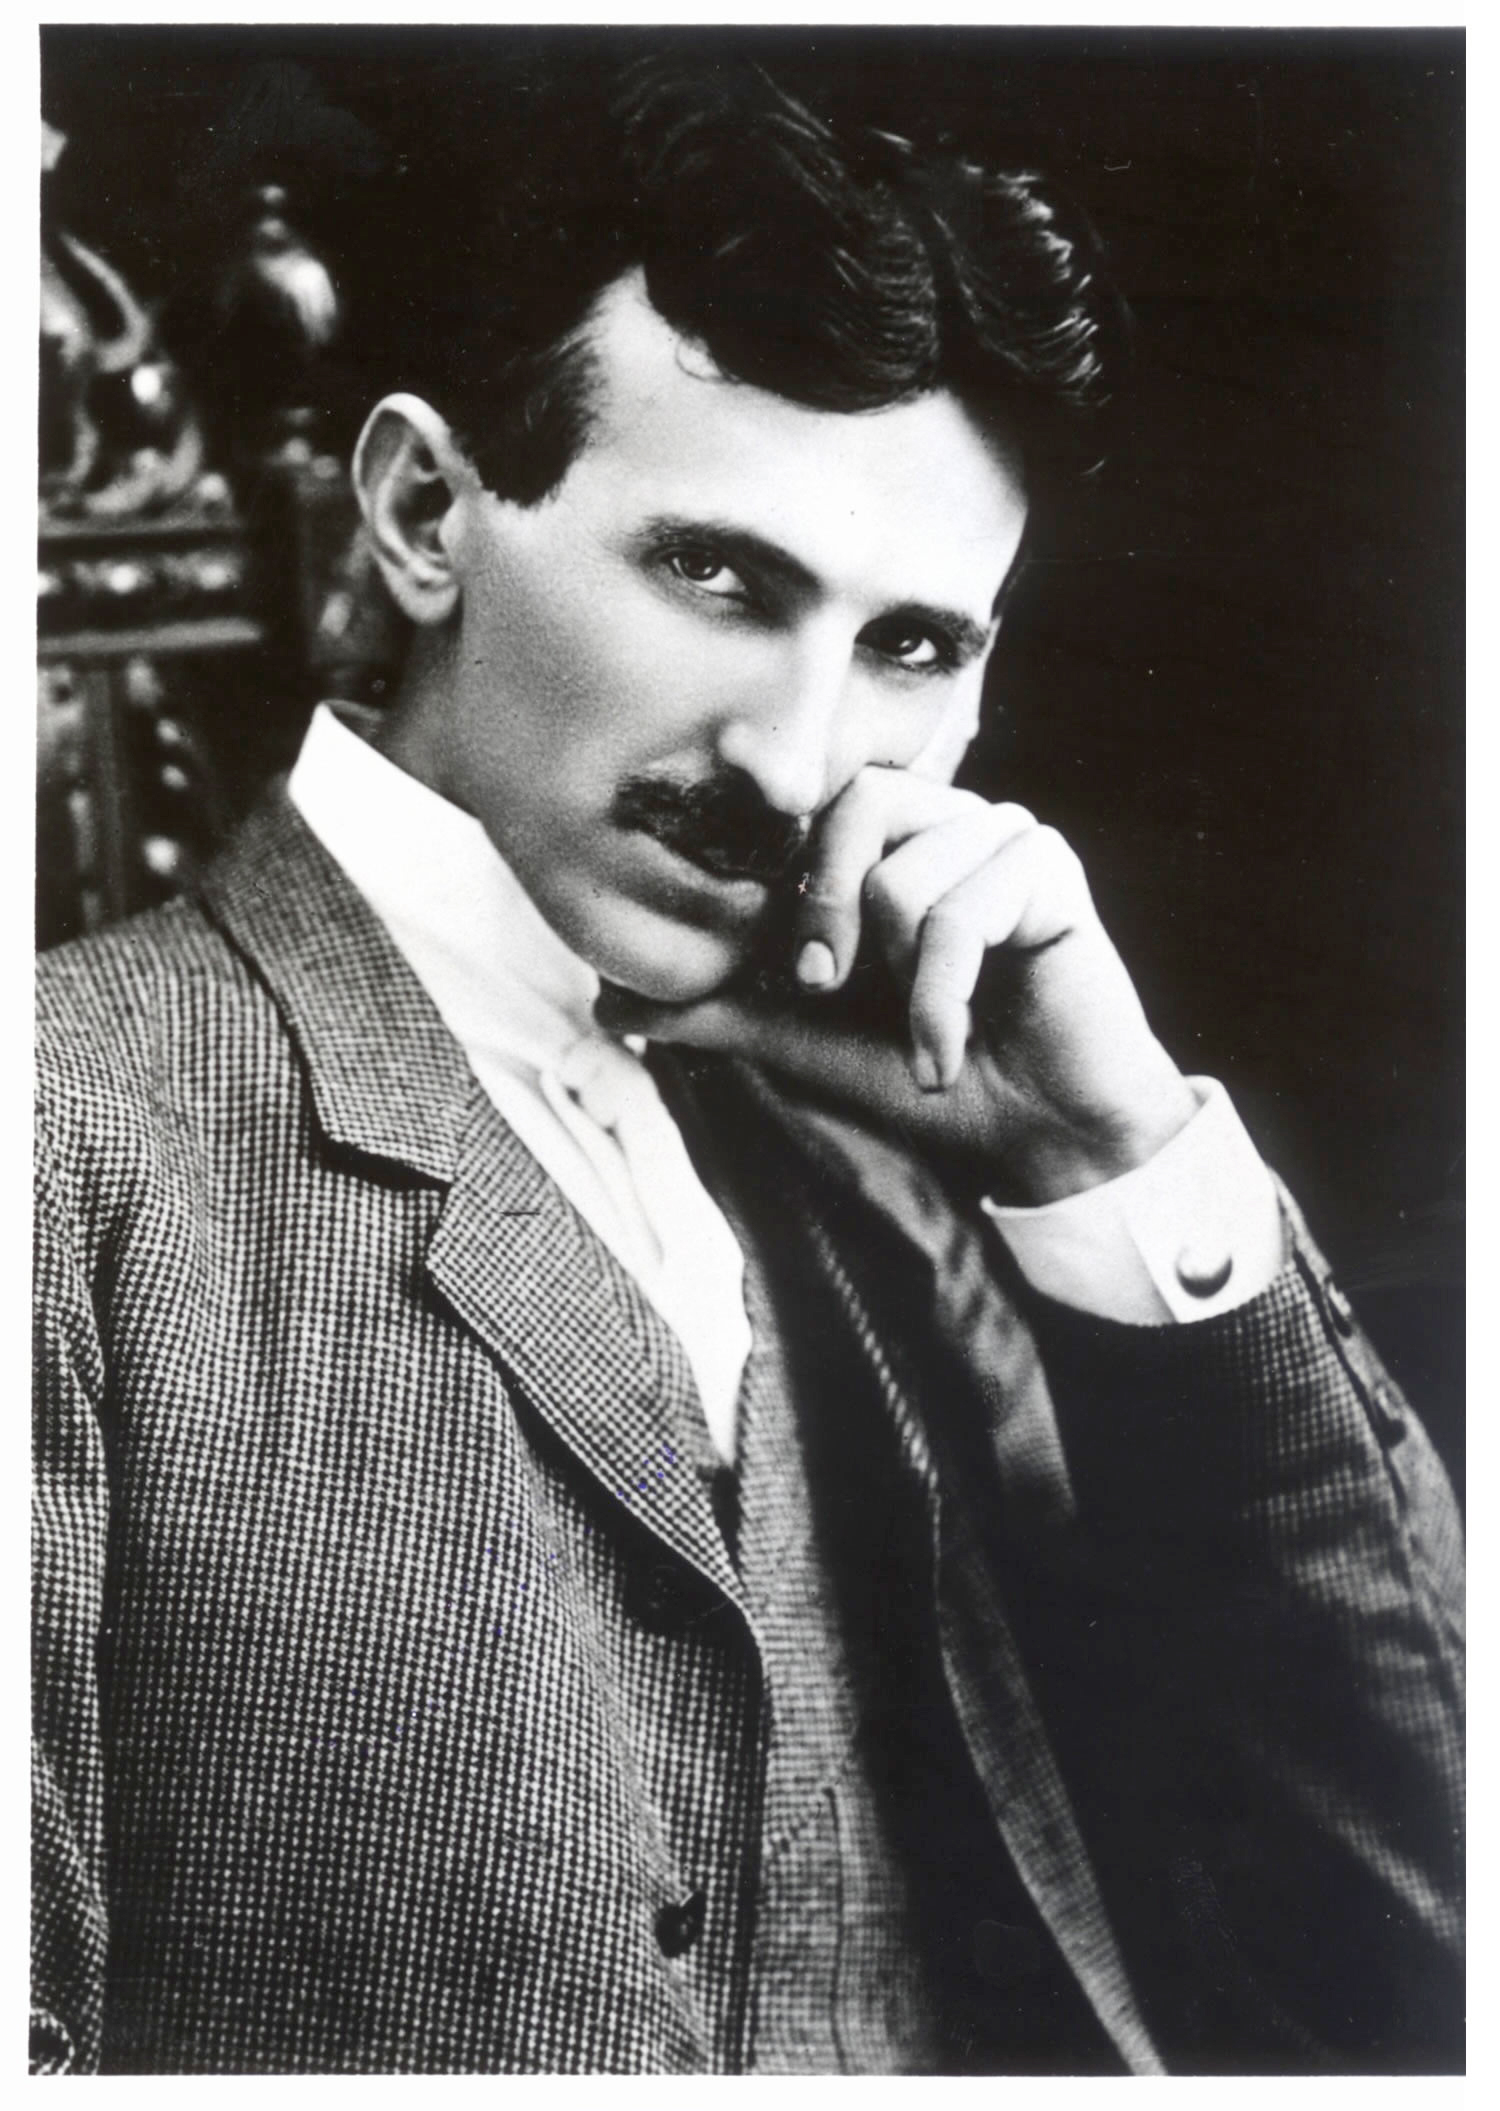 Tesla, wireless electricity and church history to be ...